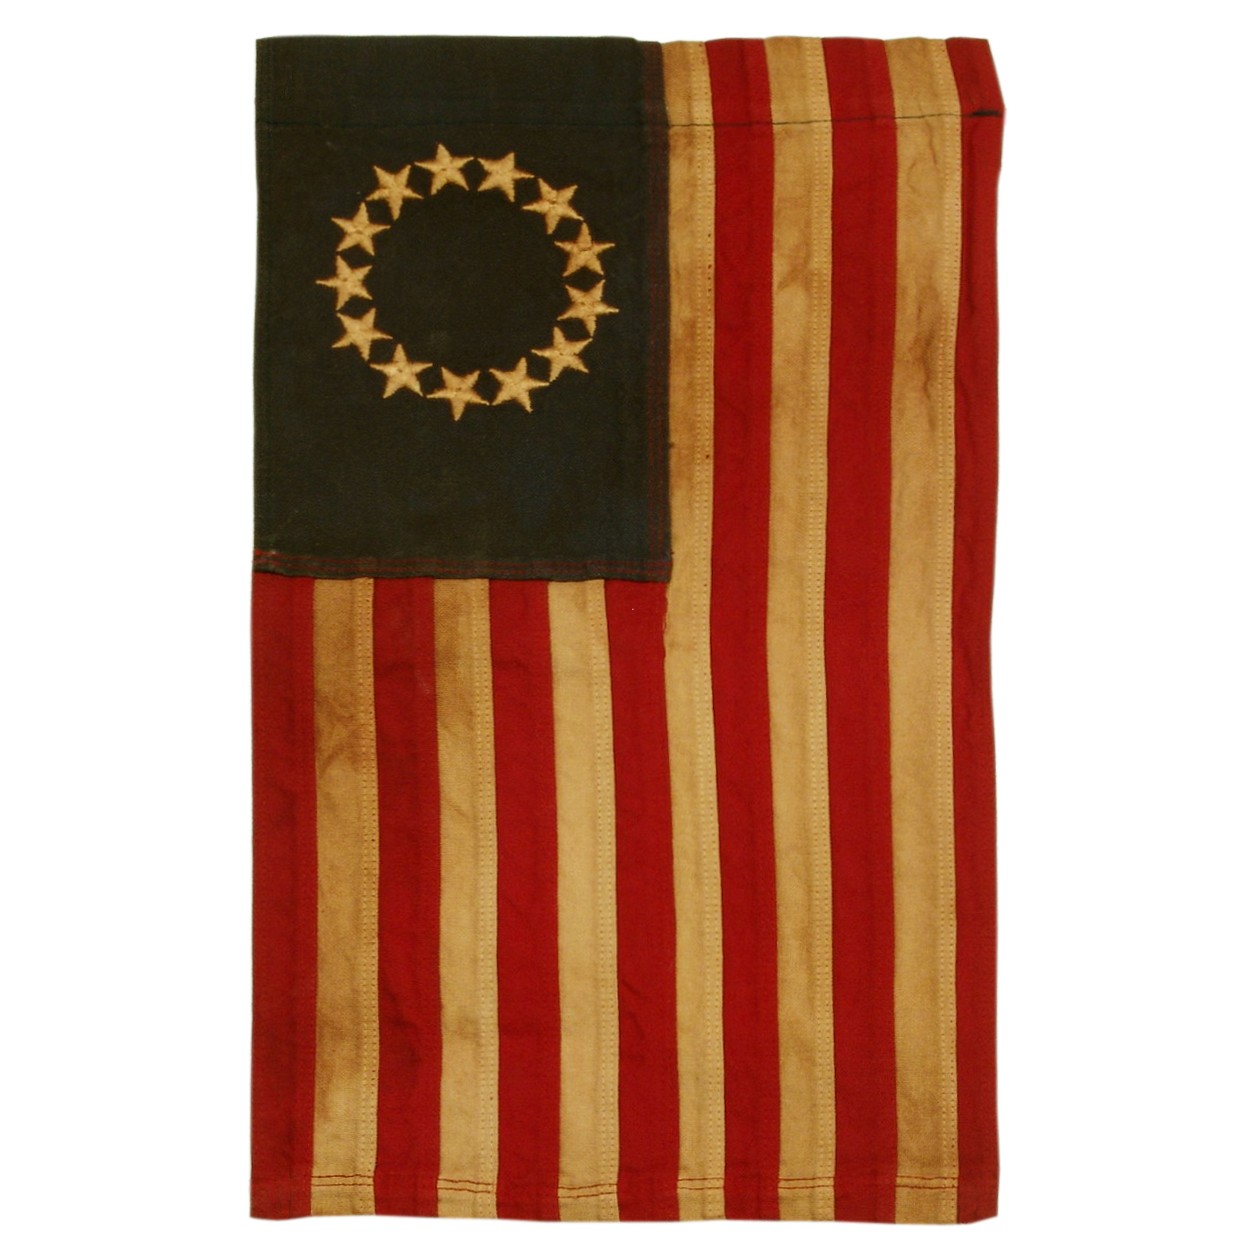 13-Star Heritage Series Garden Flag by Valley Forge